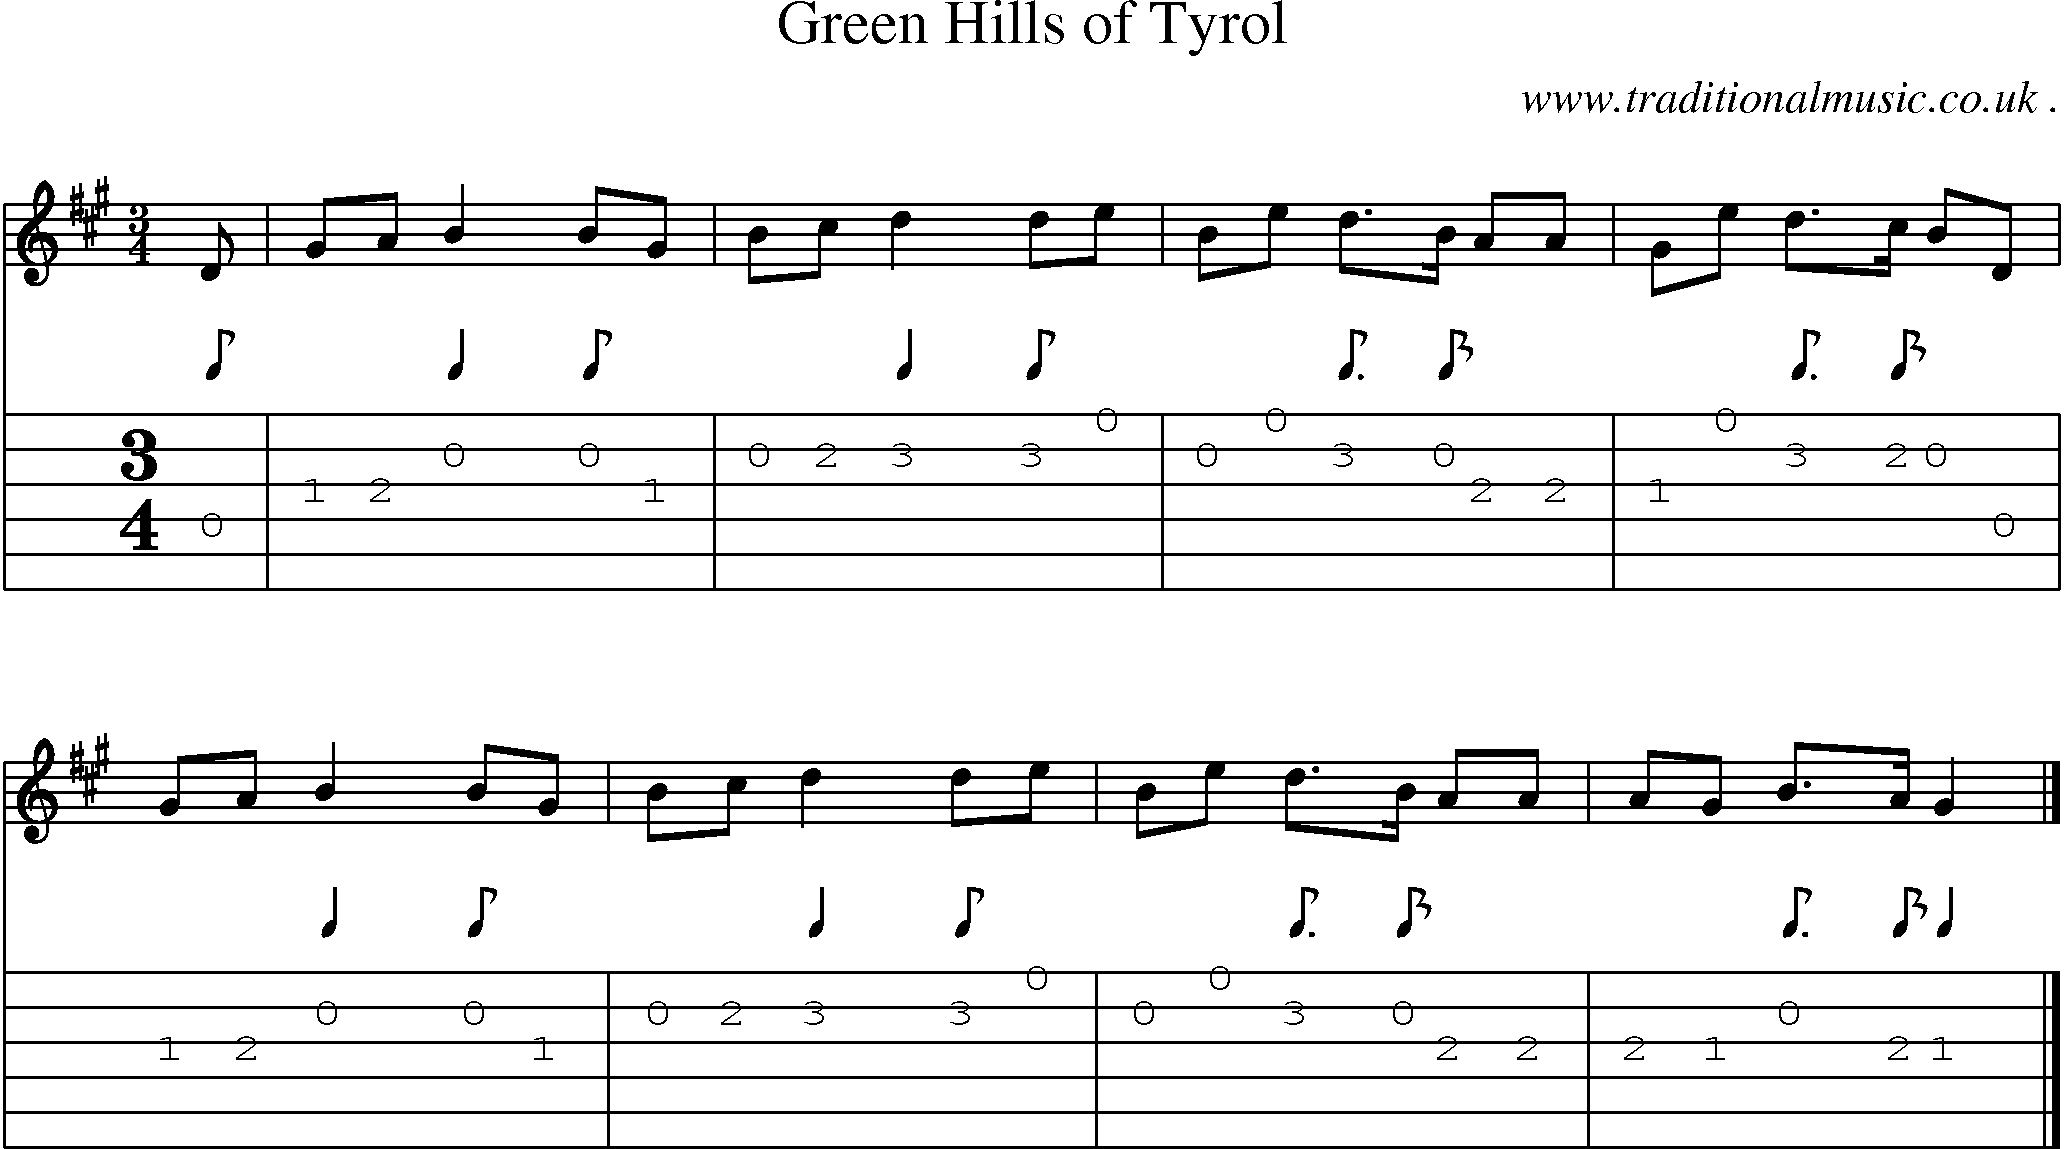 Sheet-music  score, Chords and Guitar Tabs for Green Hills Of Tyrol